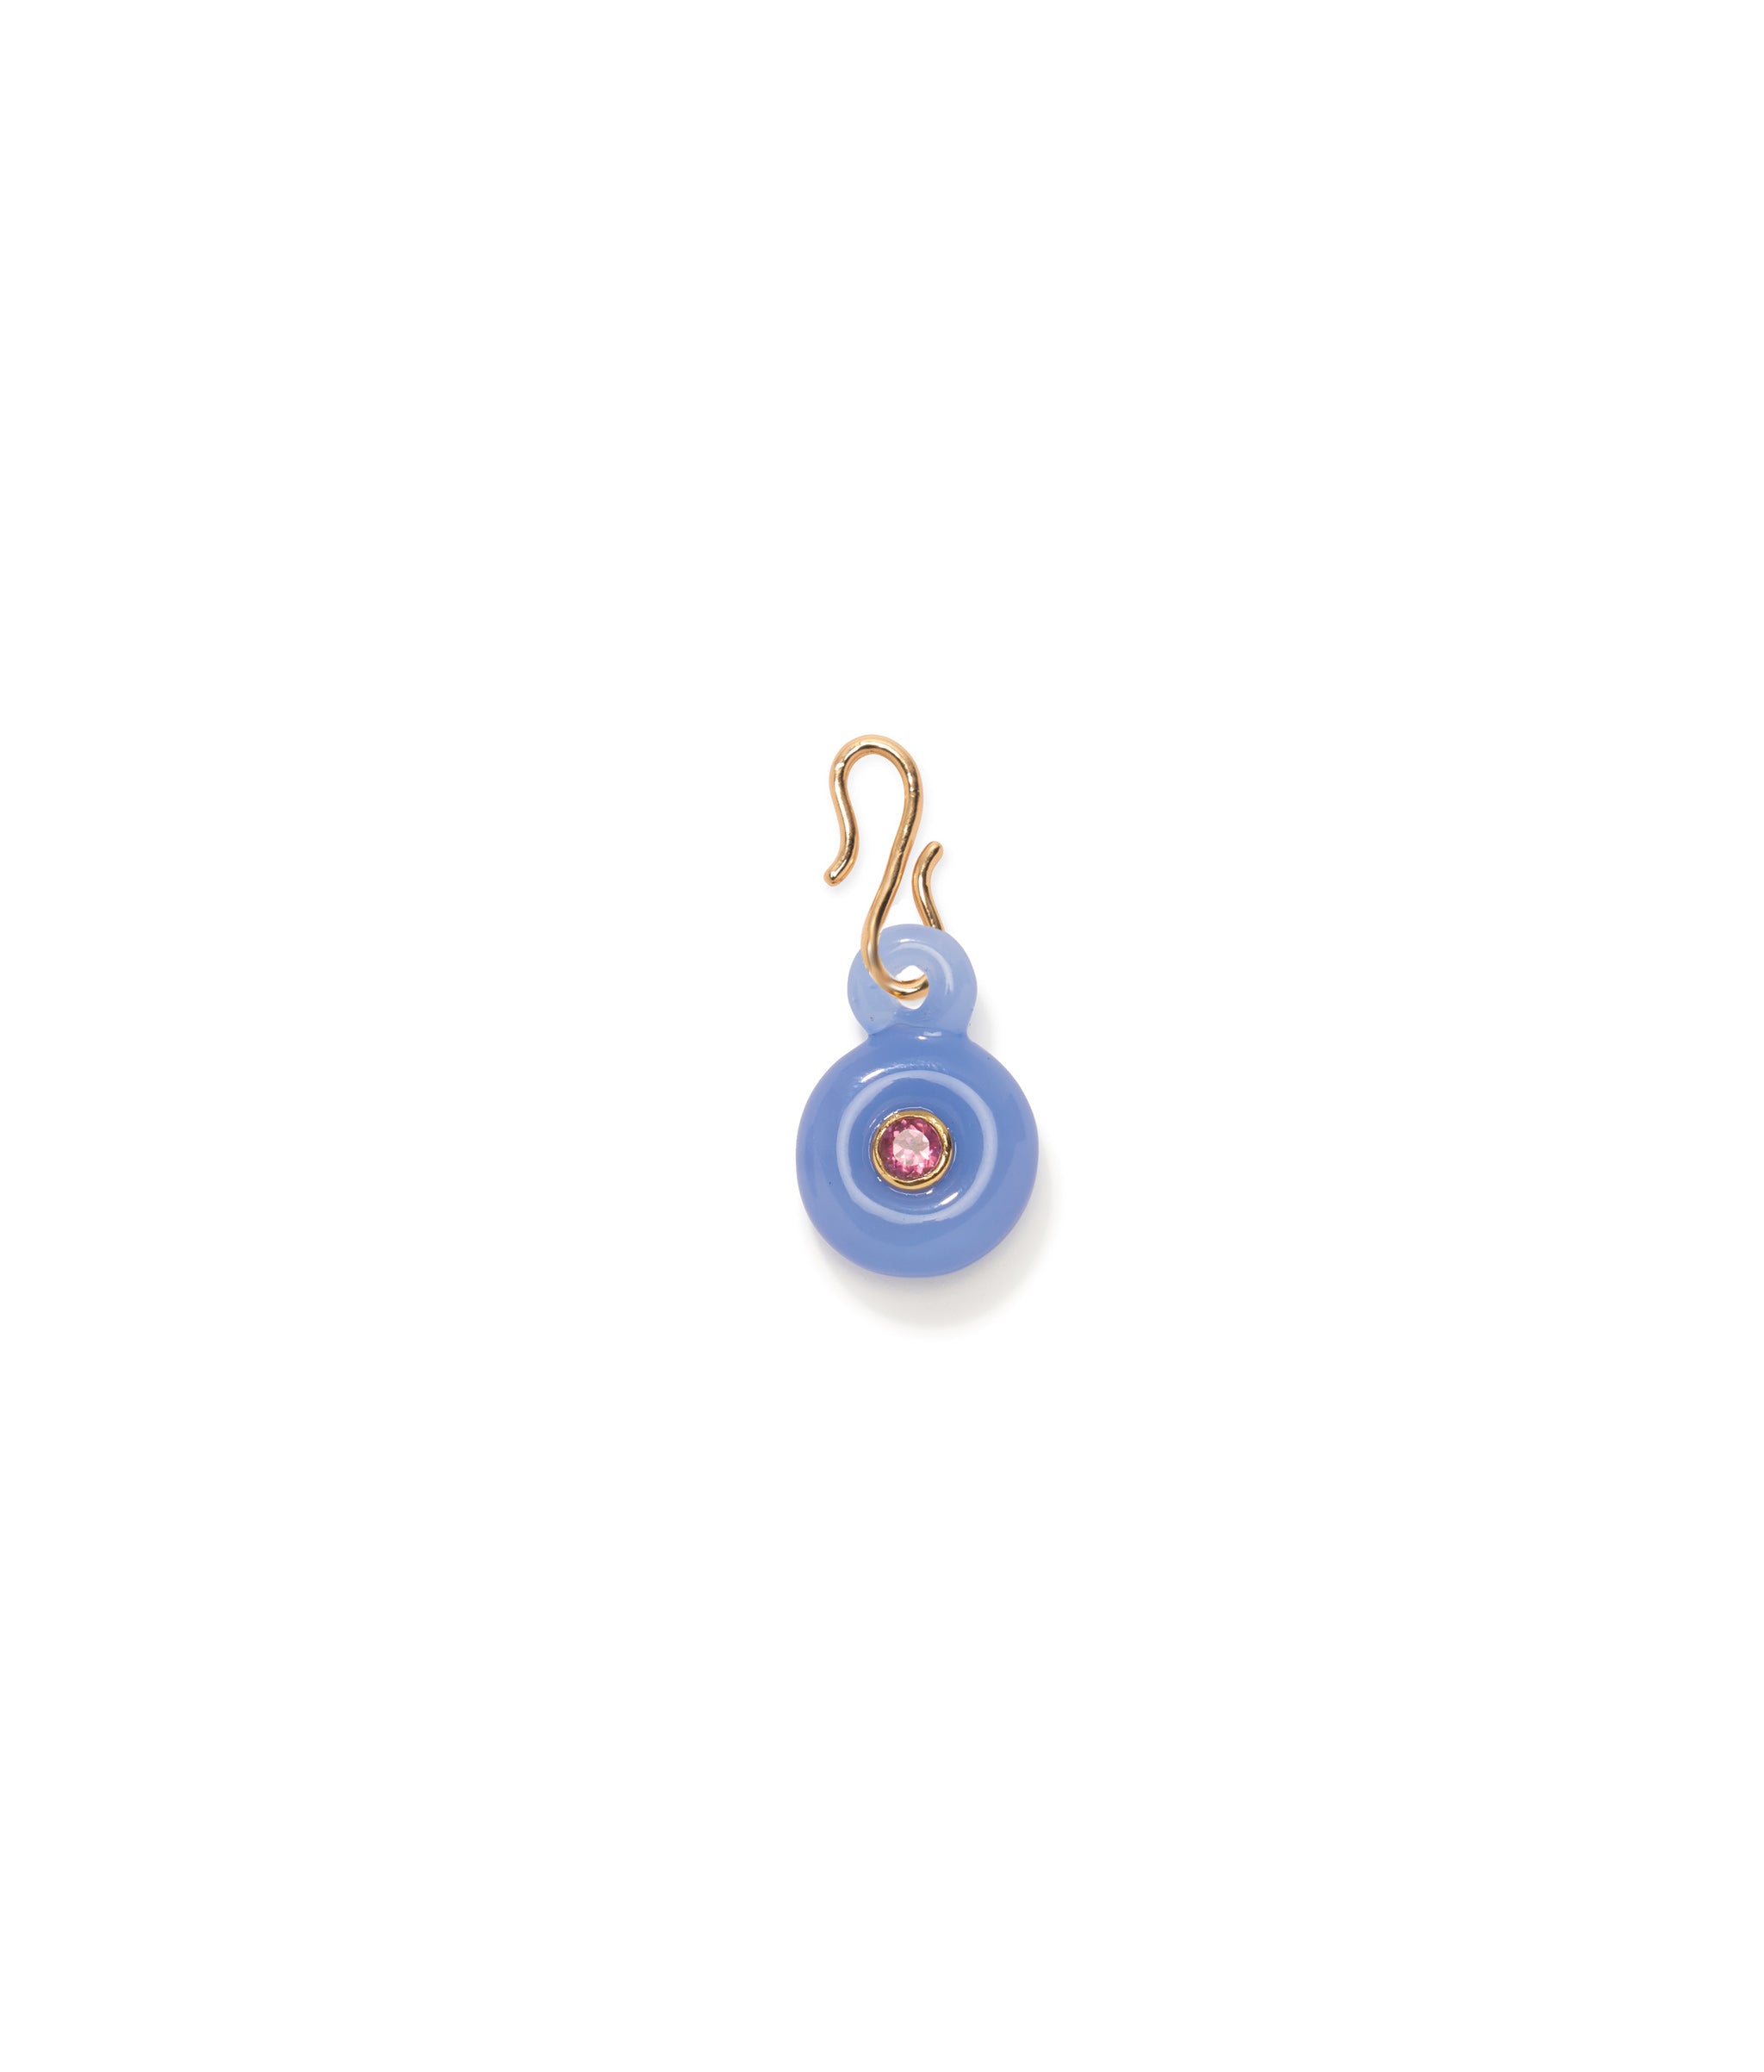 Mini Muse Charm. Periwinkle blue circular glass charm with pink rhodolite inlay, and gold-plated s-hook.